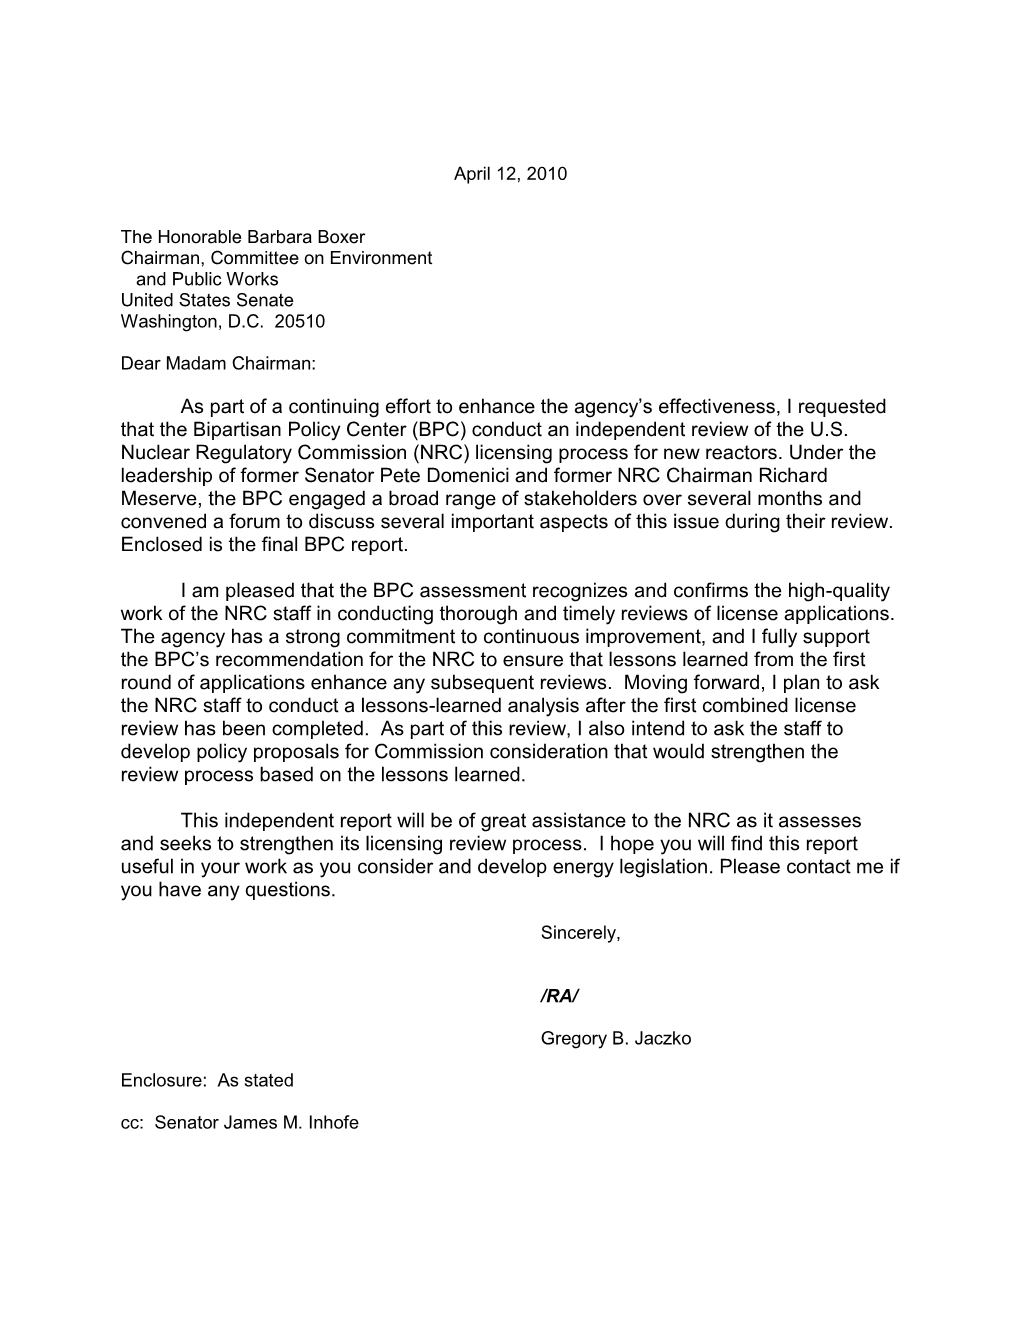 As Part of a Continuing Effort to Enhance the Agency's Effectiveness, I Requested That the Bipartisan Policy Center